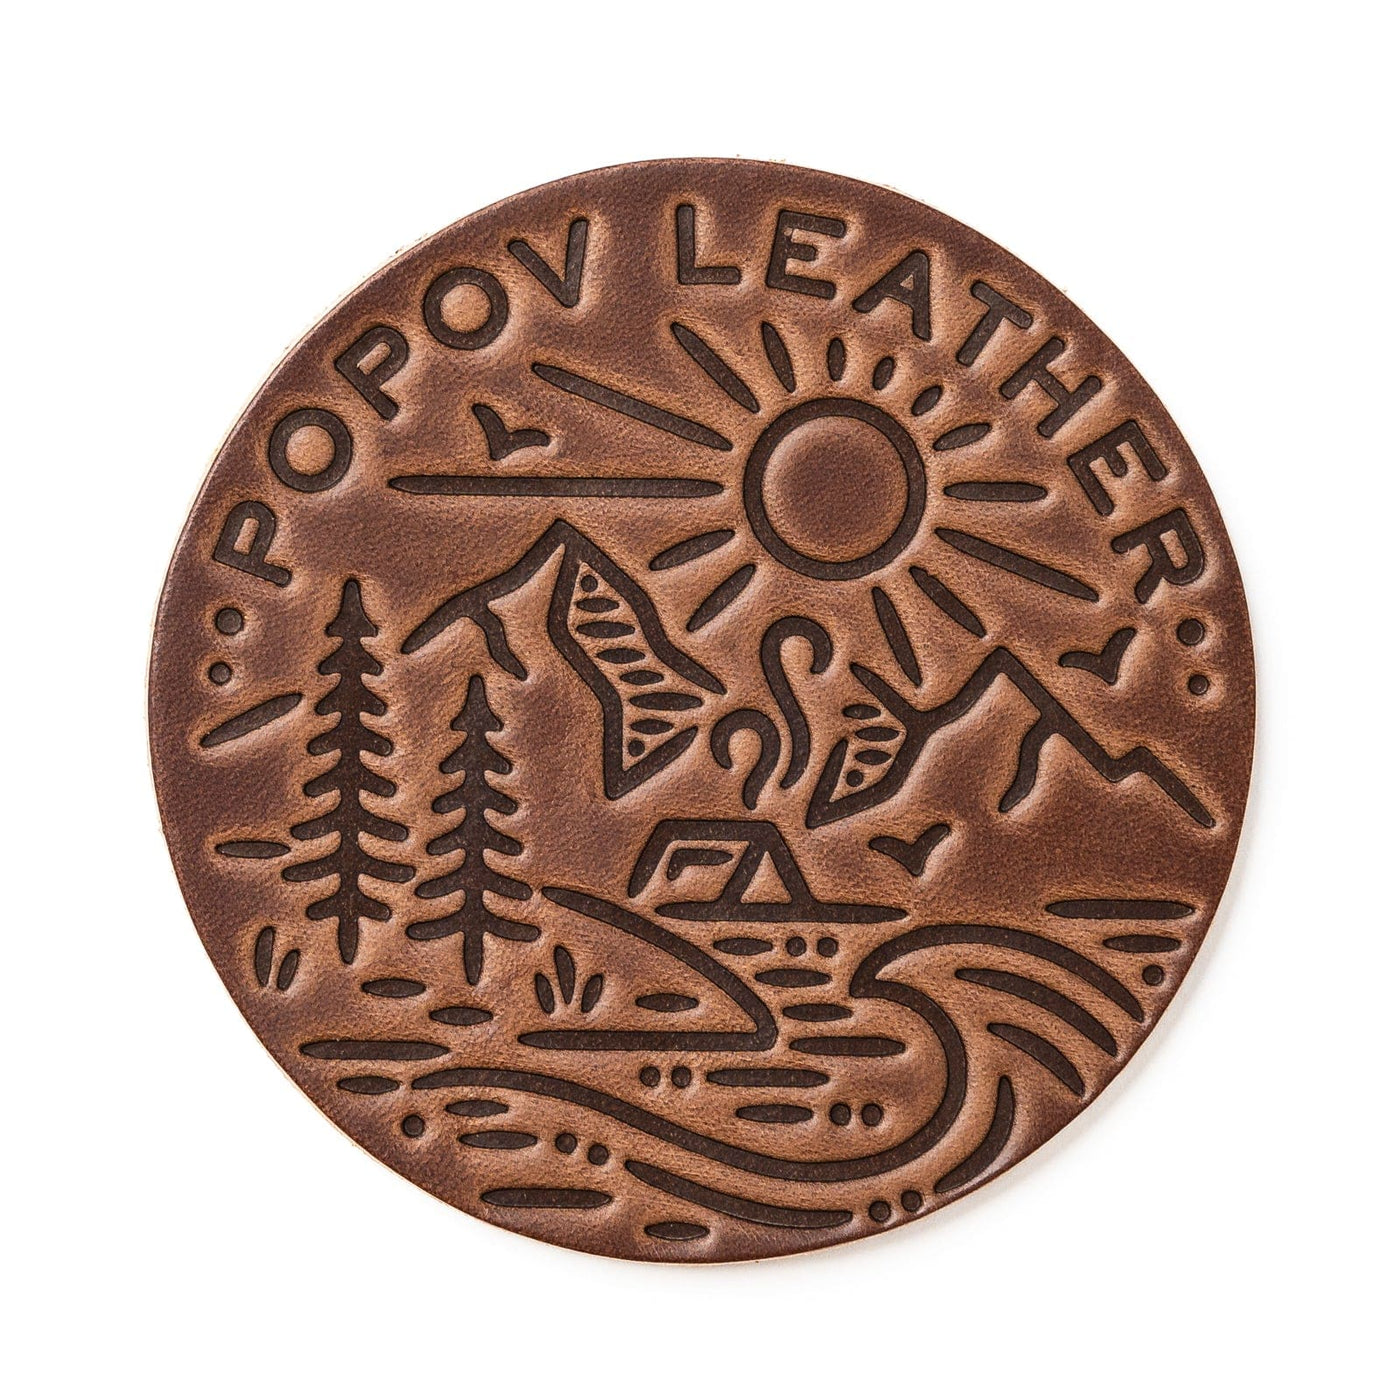 Four Seasons Coasters - Natural - 4 Pack Popov Leather